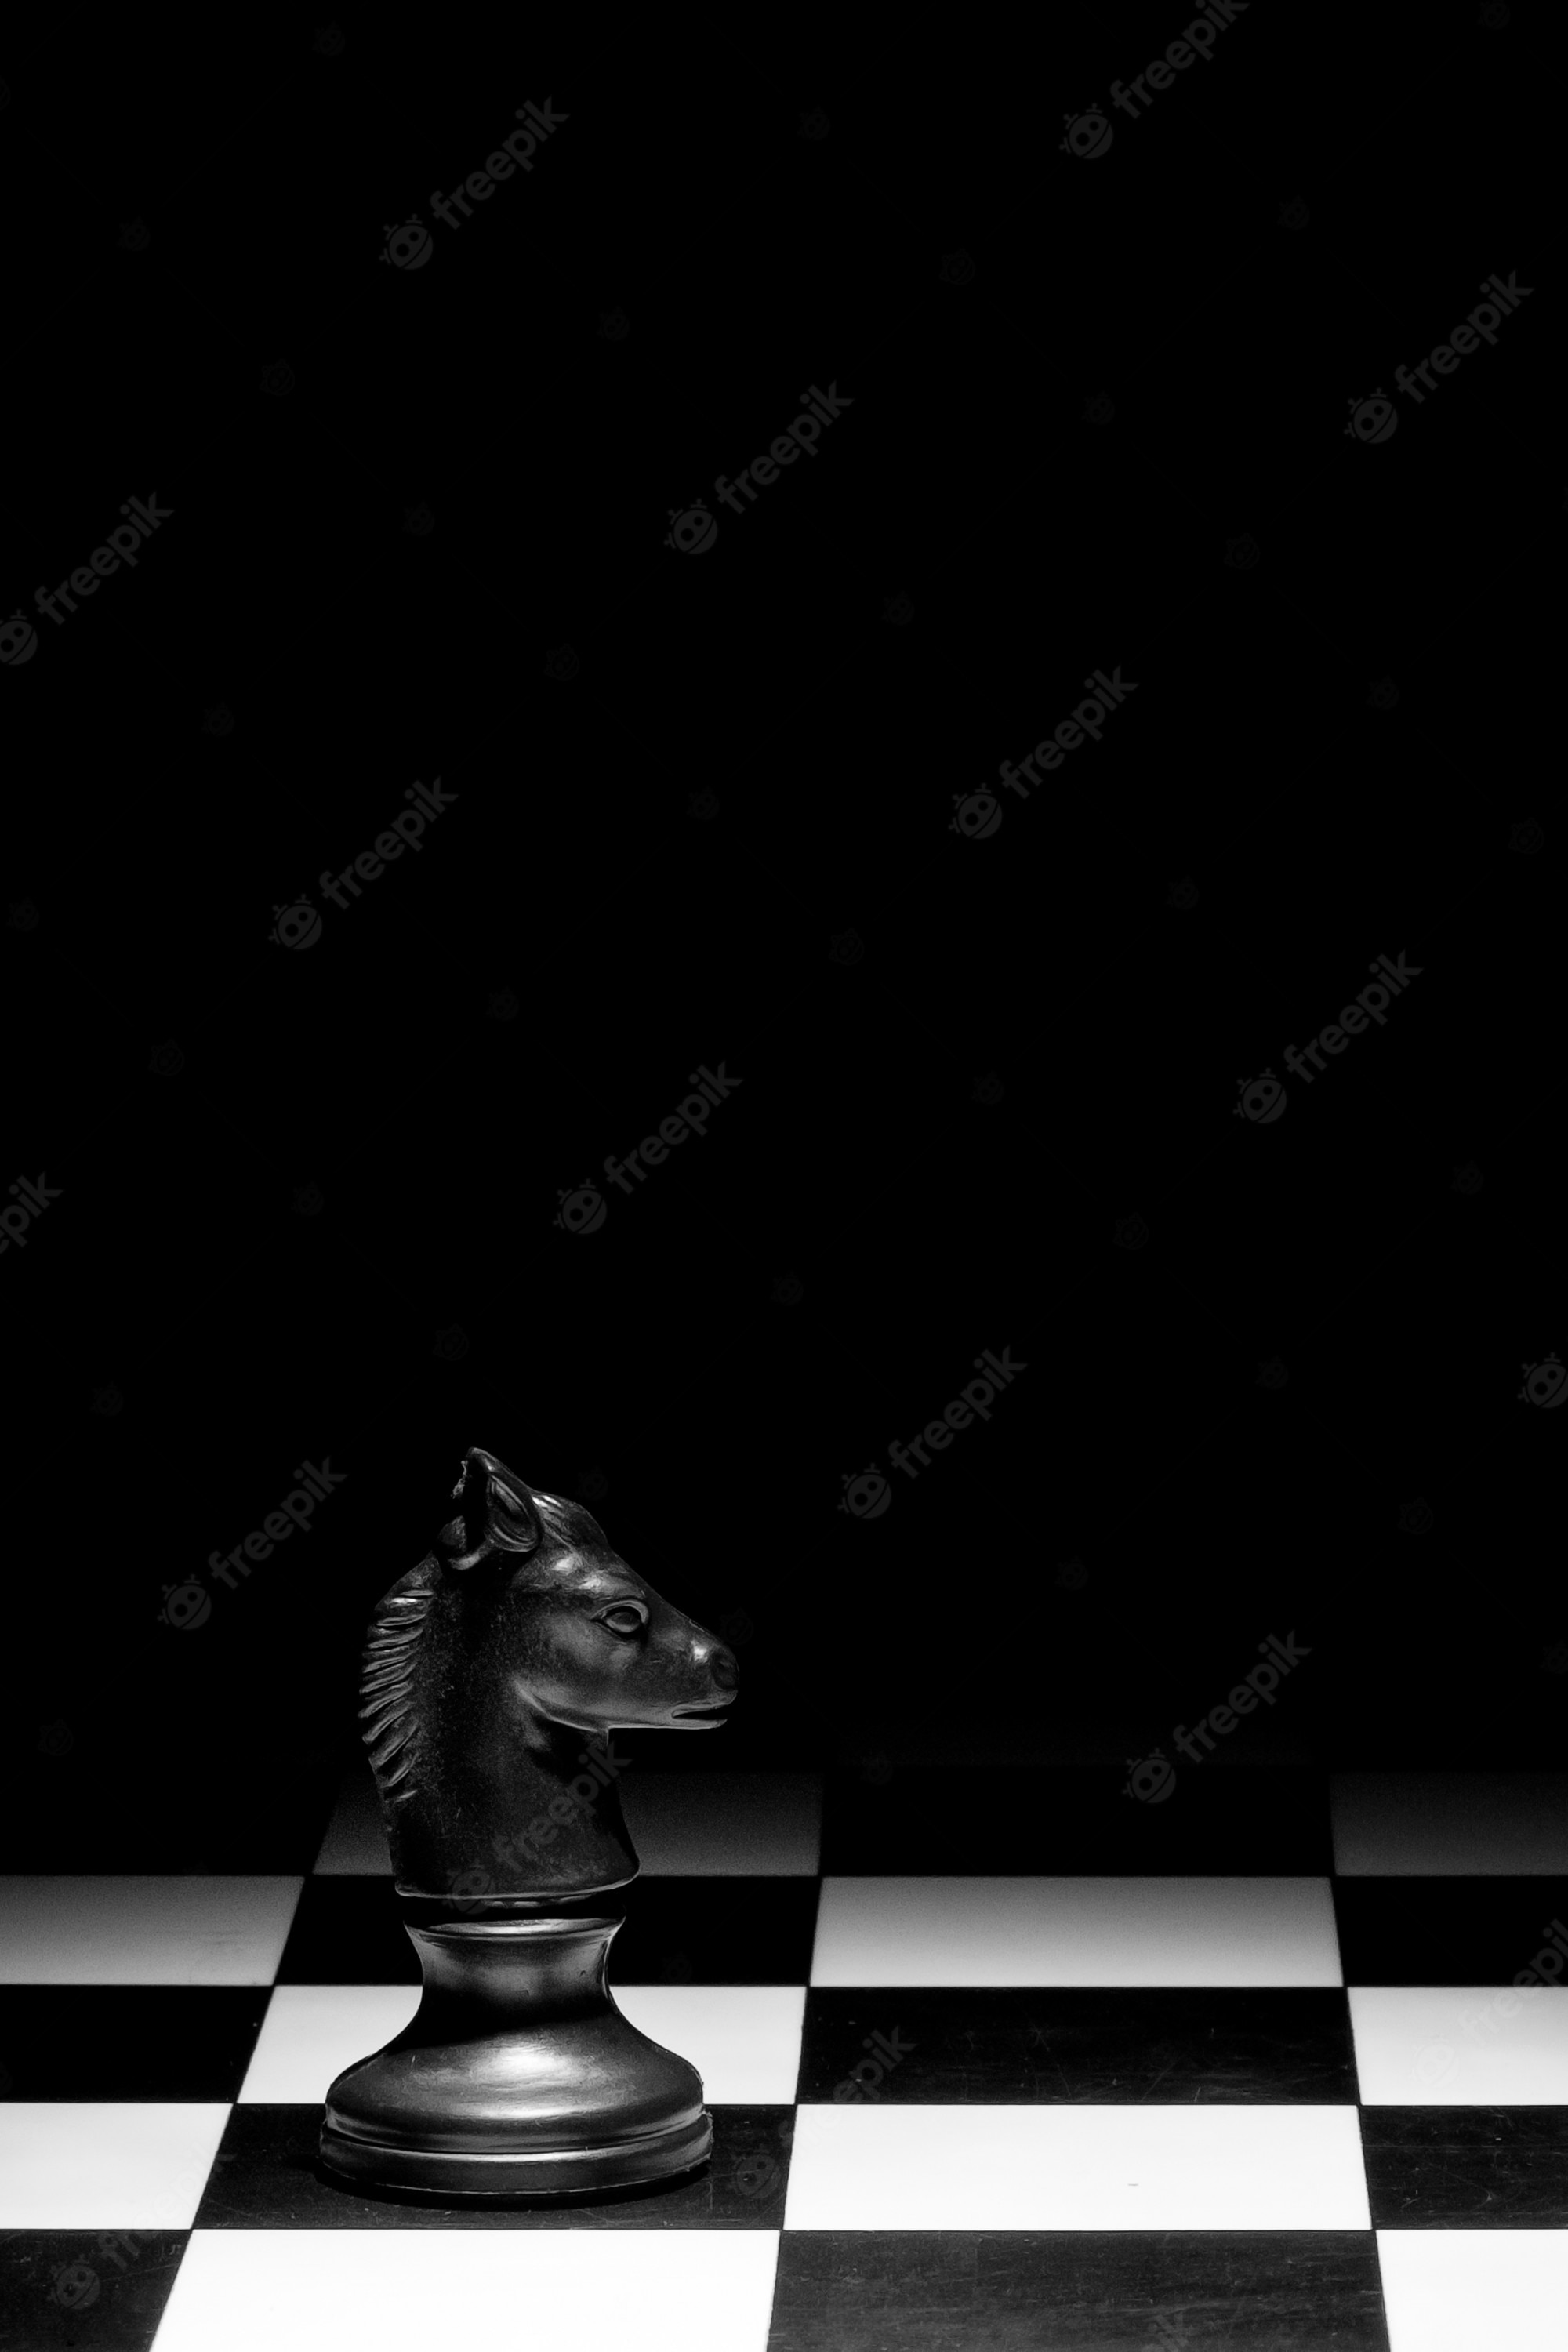 Free Photo. Knight chess piece on the board against a black background